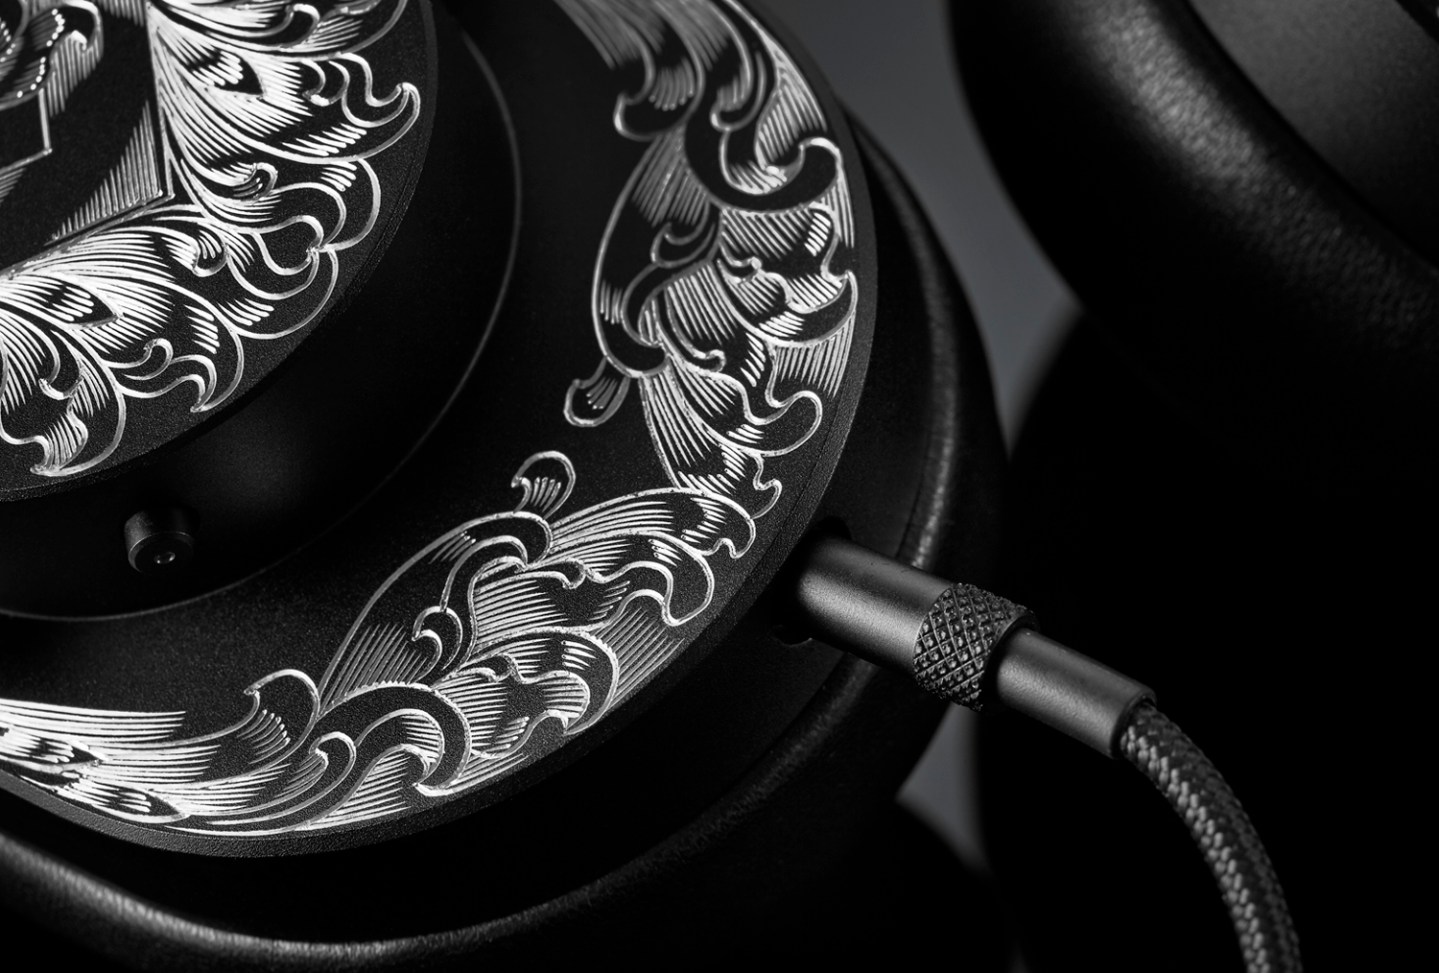 Limited-edition Johnny Dowell MH40 Over-Ear Headphones